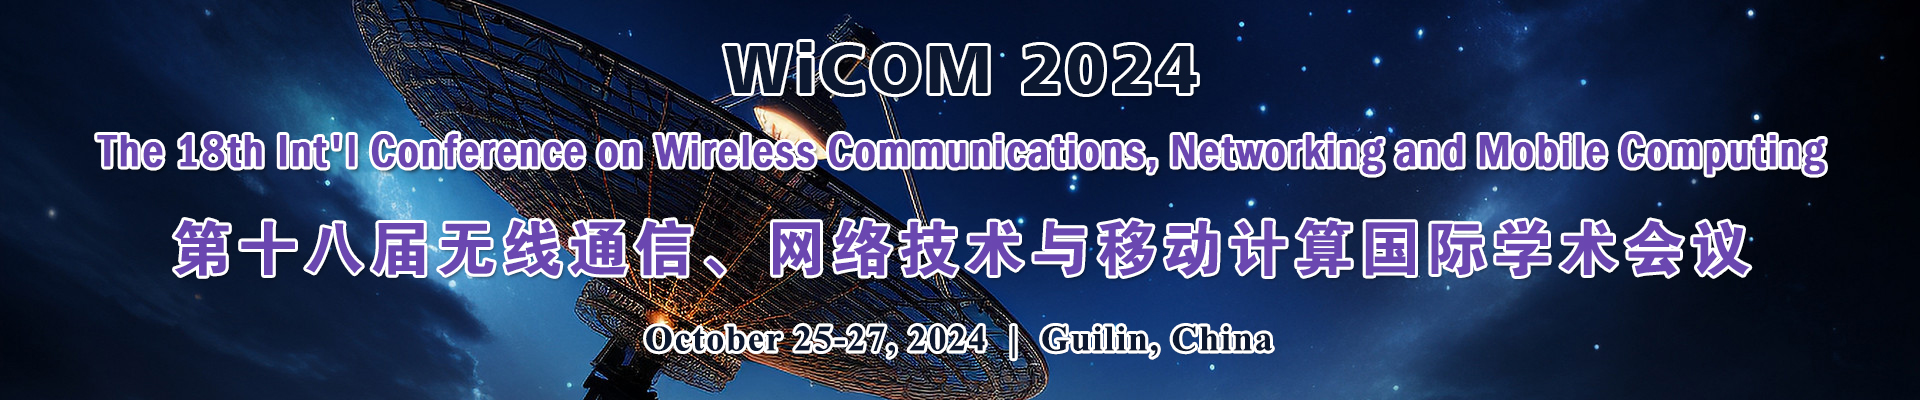 The 18th Int'l Conference on Wireless Communications, Networking and Mobile Computing (WiCOM 2024)